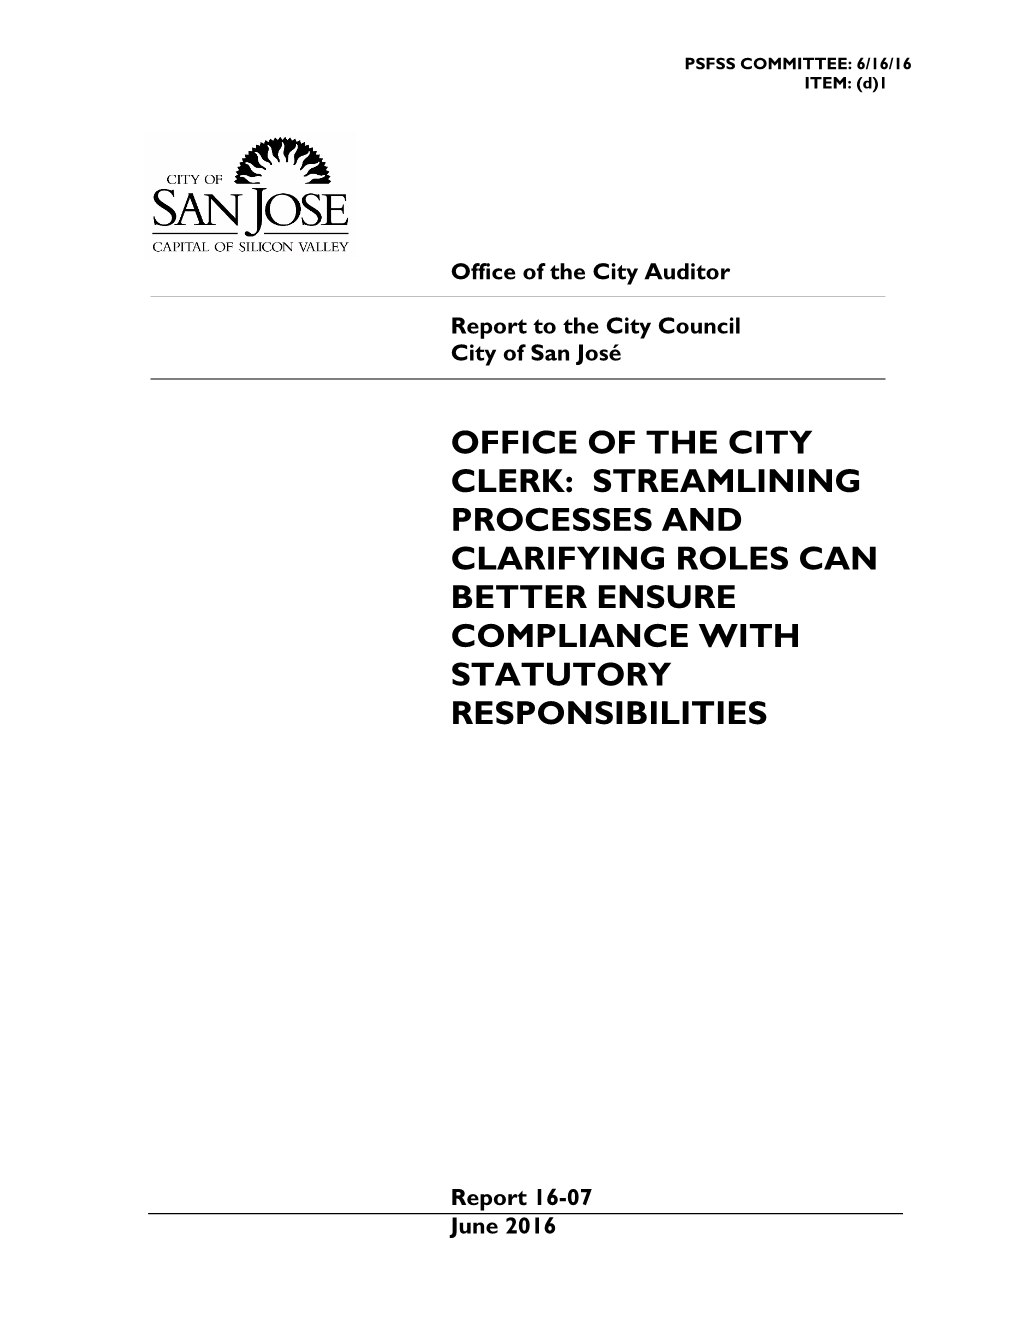 Office of the City Clerk: Streamlining Processes and Clarifying Roles Can Better Ensure Compliance with Statutory Responsibilities